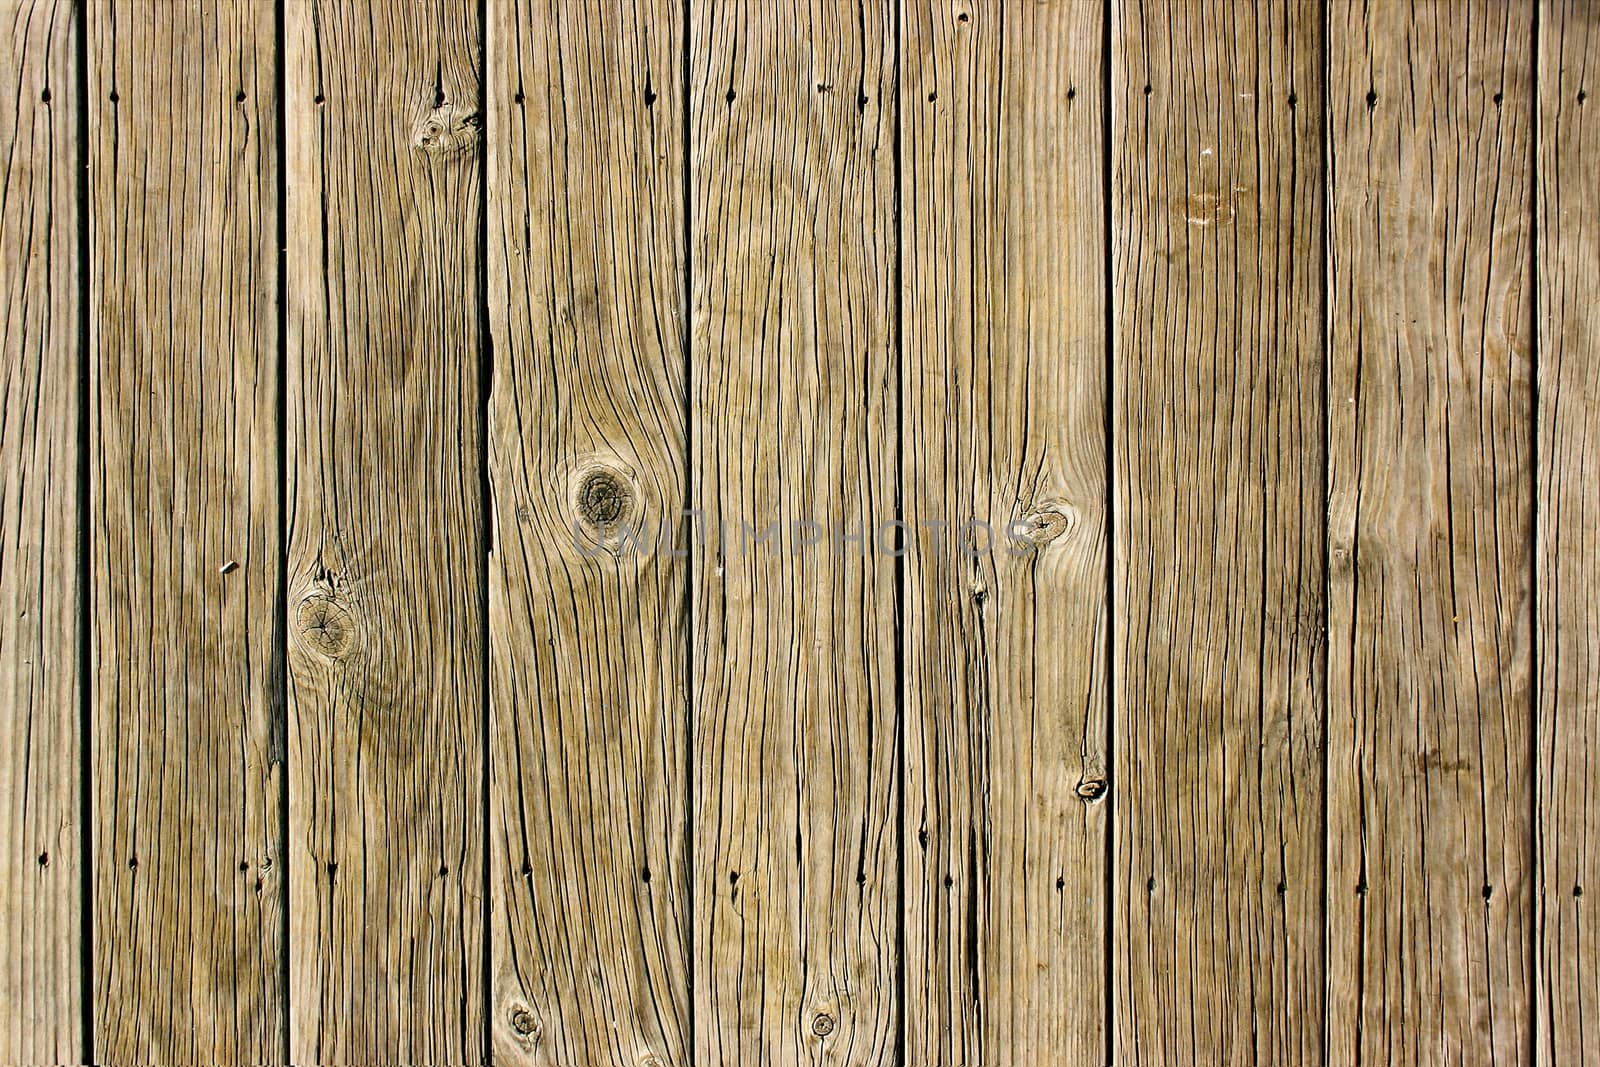 An Old Wooden Boards Background 